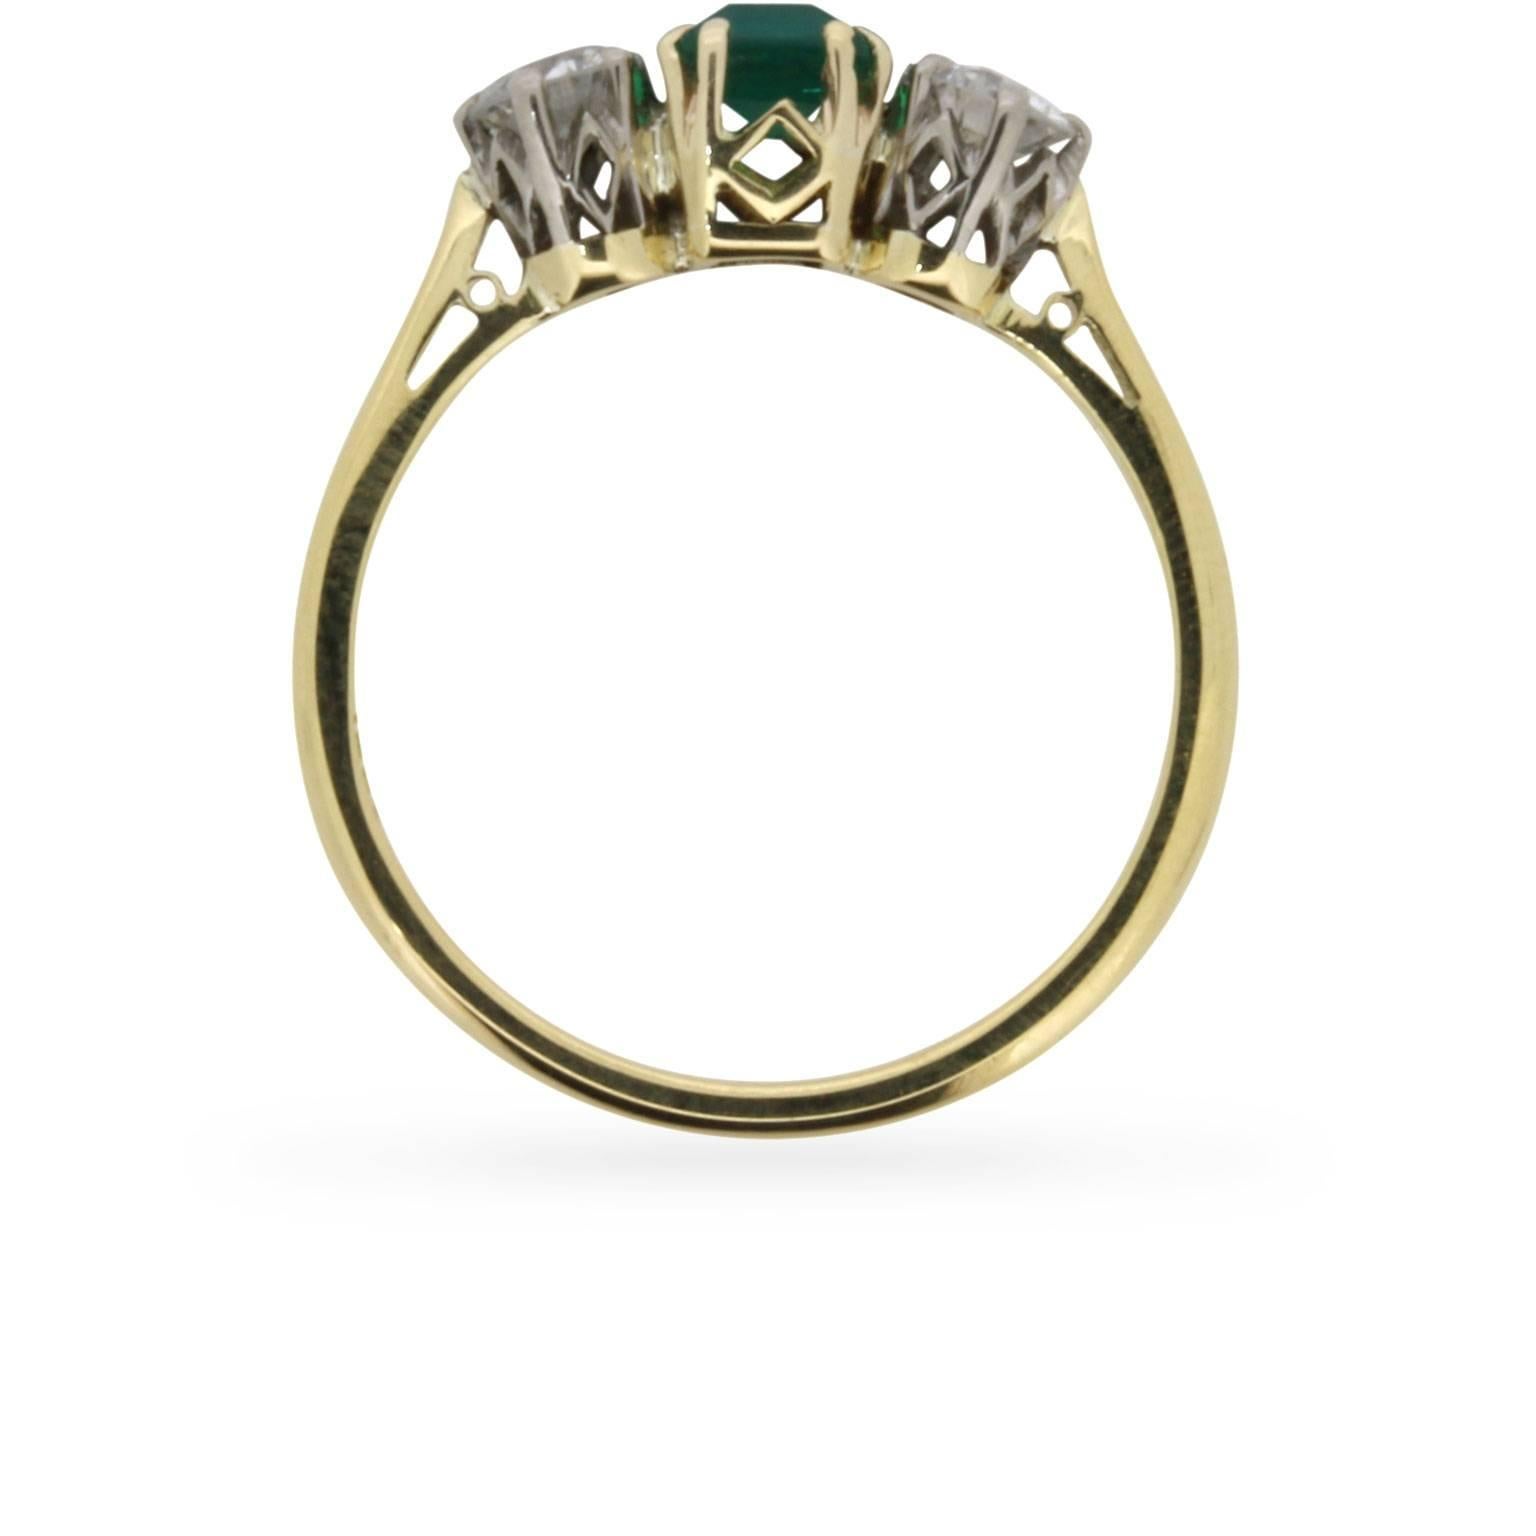 This art deco ring is simply stunning. It is a desirable and elegant ring, which is all handcrafted. The workmanship and expert knowledge shines through in the detailing and artistry of this ring. In the centre you have a heavenly, deep green